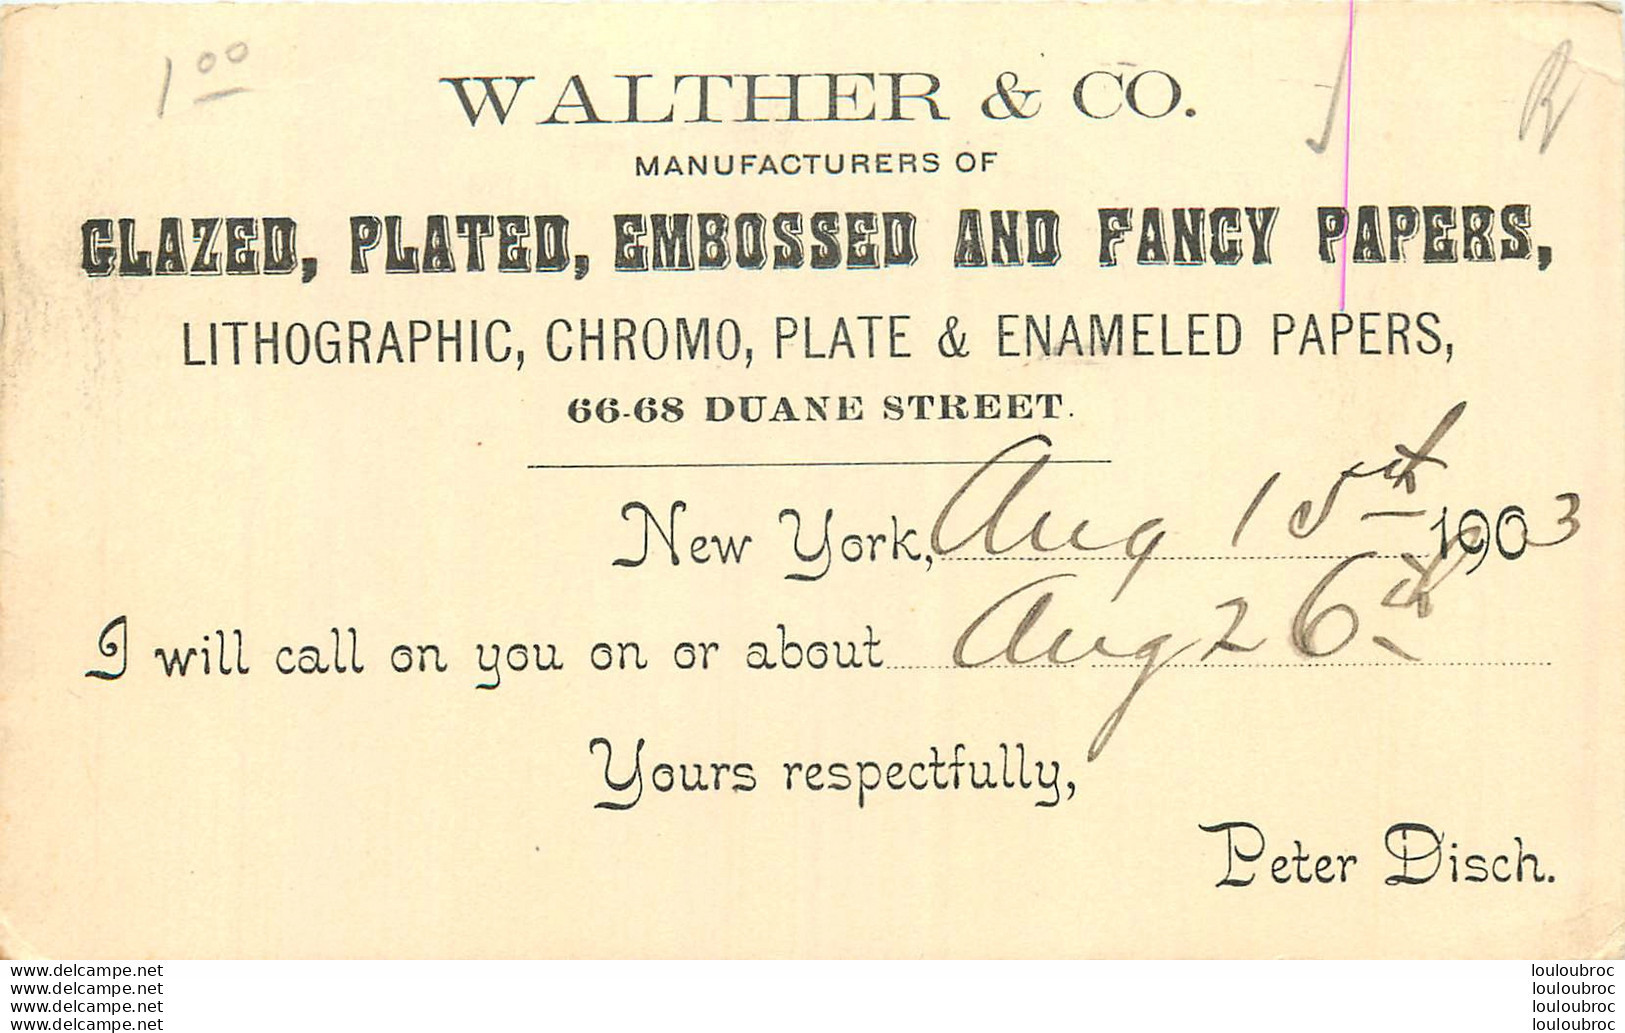 NEW YORK WALTHER AND CO  GLAZED PLATED EMBOSSED END FANCY PAPERS 1903 ENTIER POSTAL - 1901-20